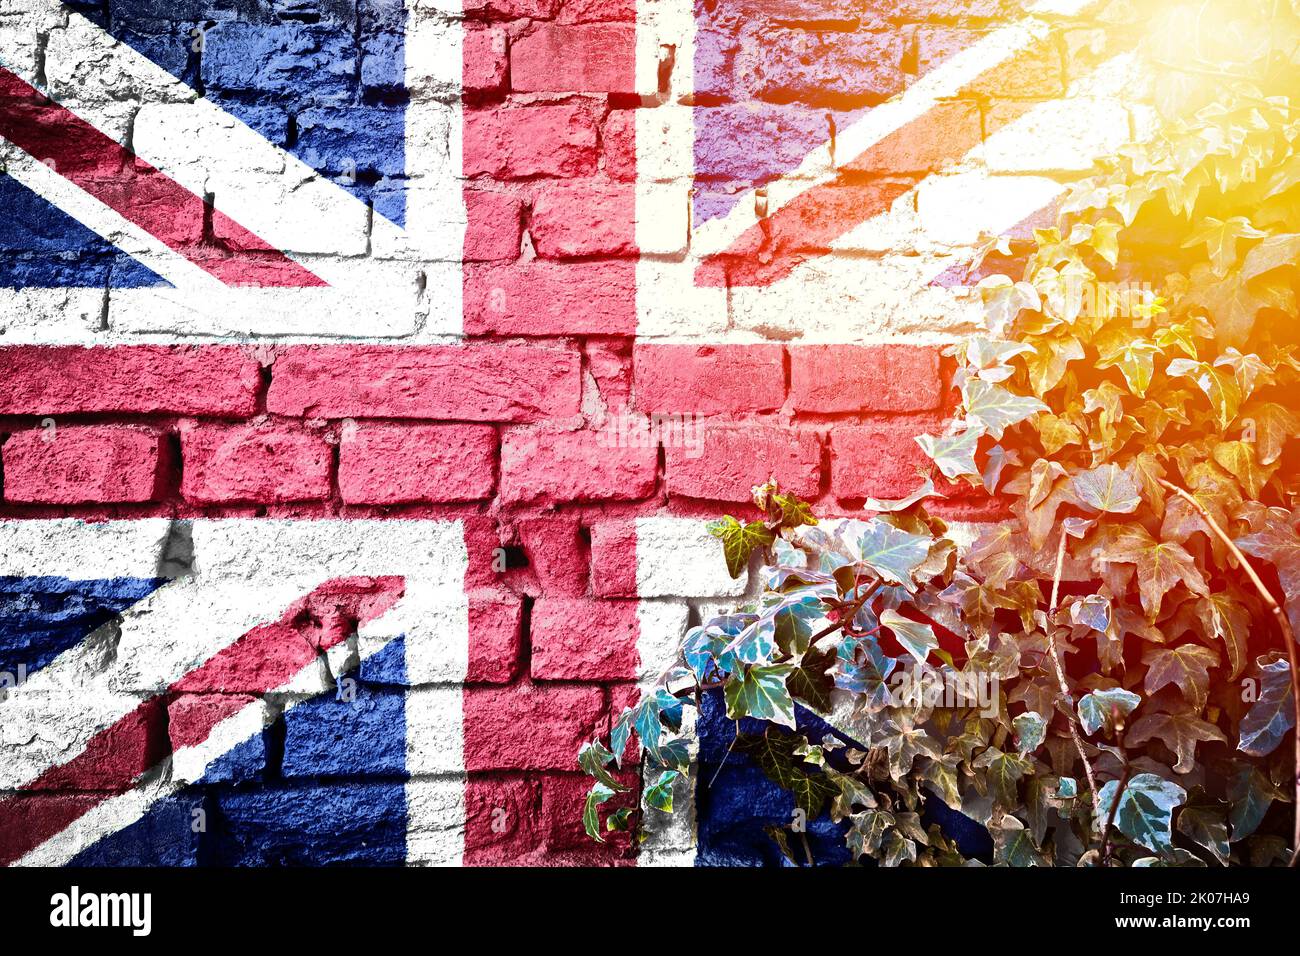 UK grunge flag on brick wall with ivy plant sun haze view, country symbol concept Stock Photo